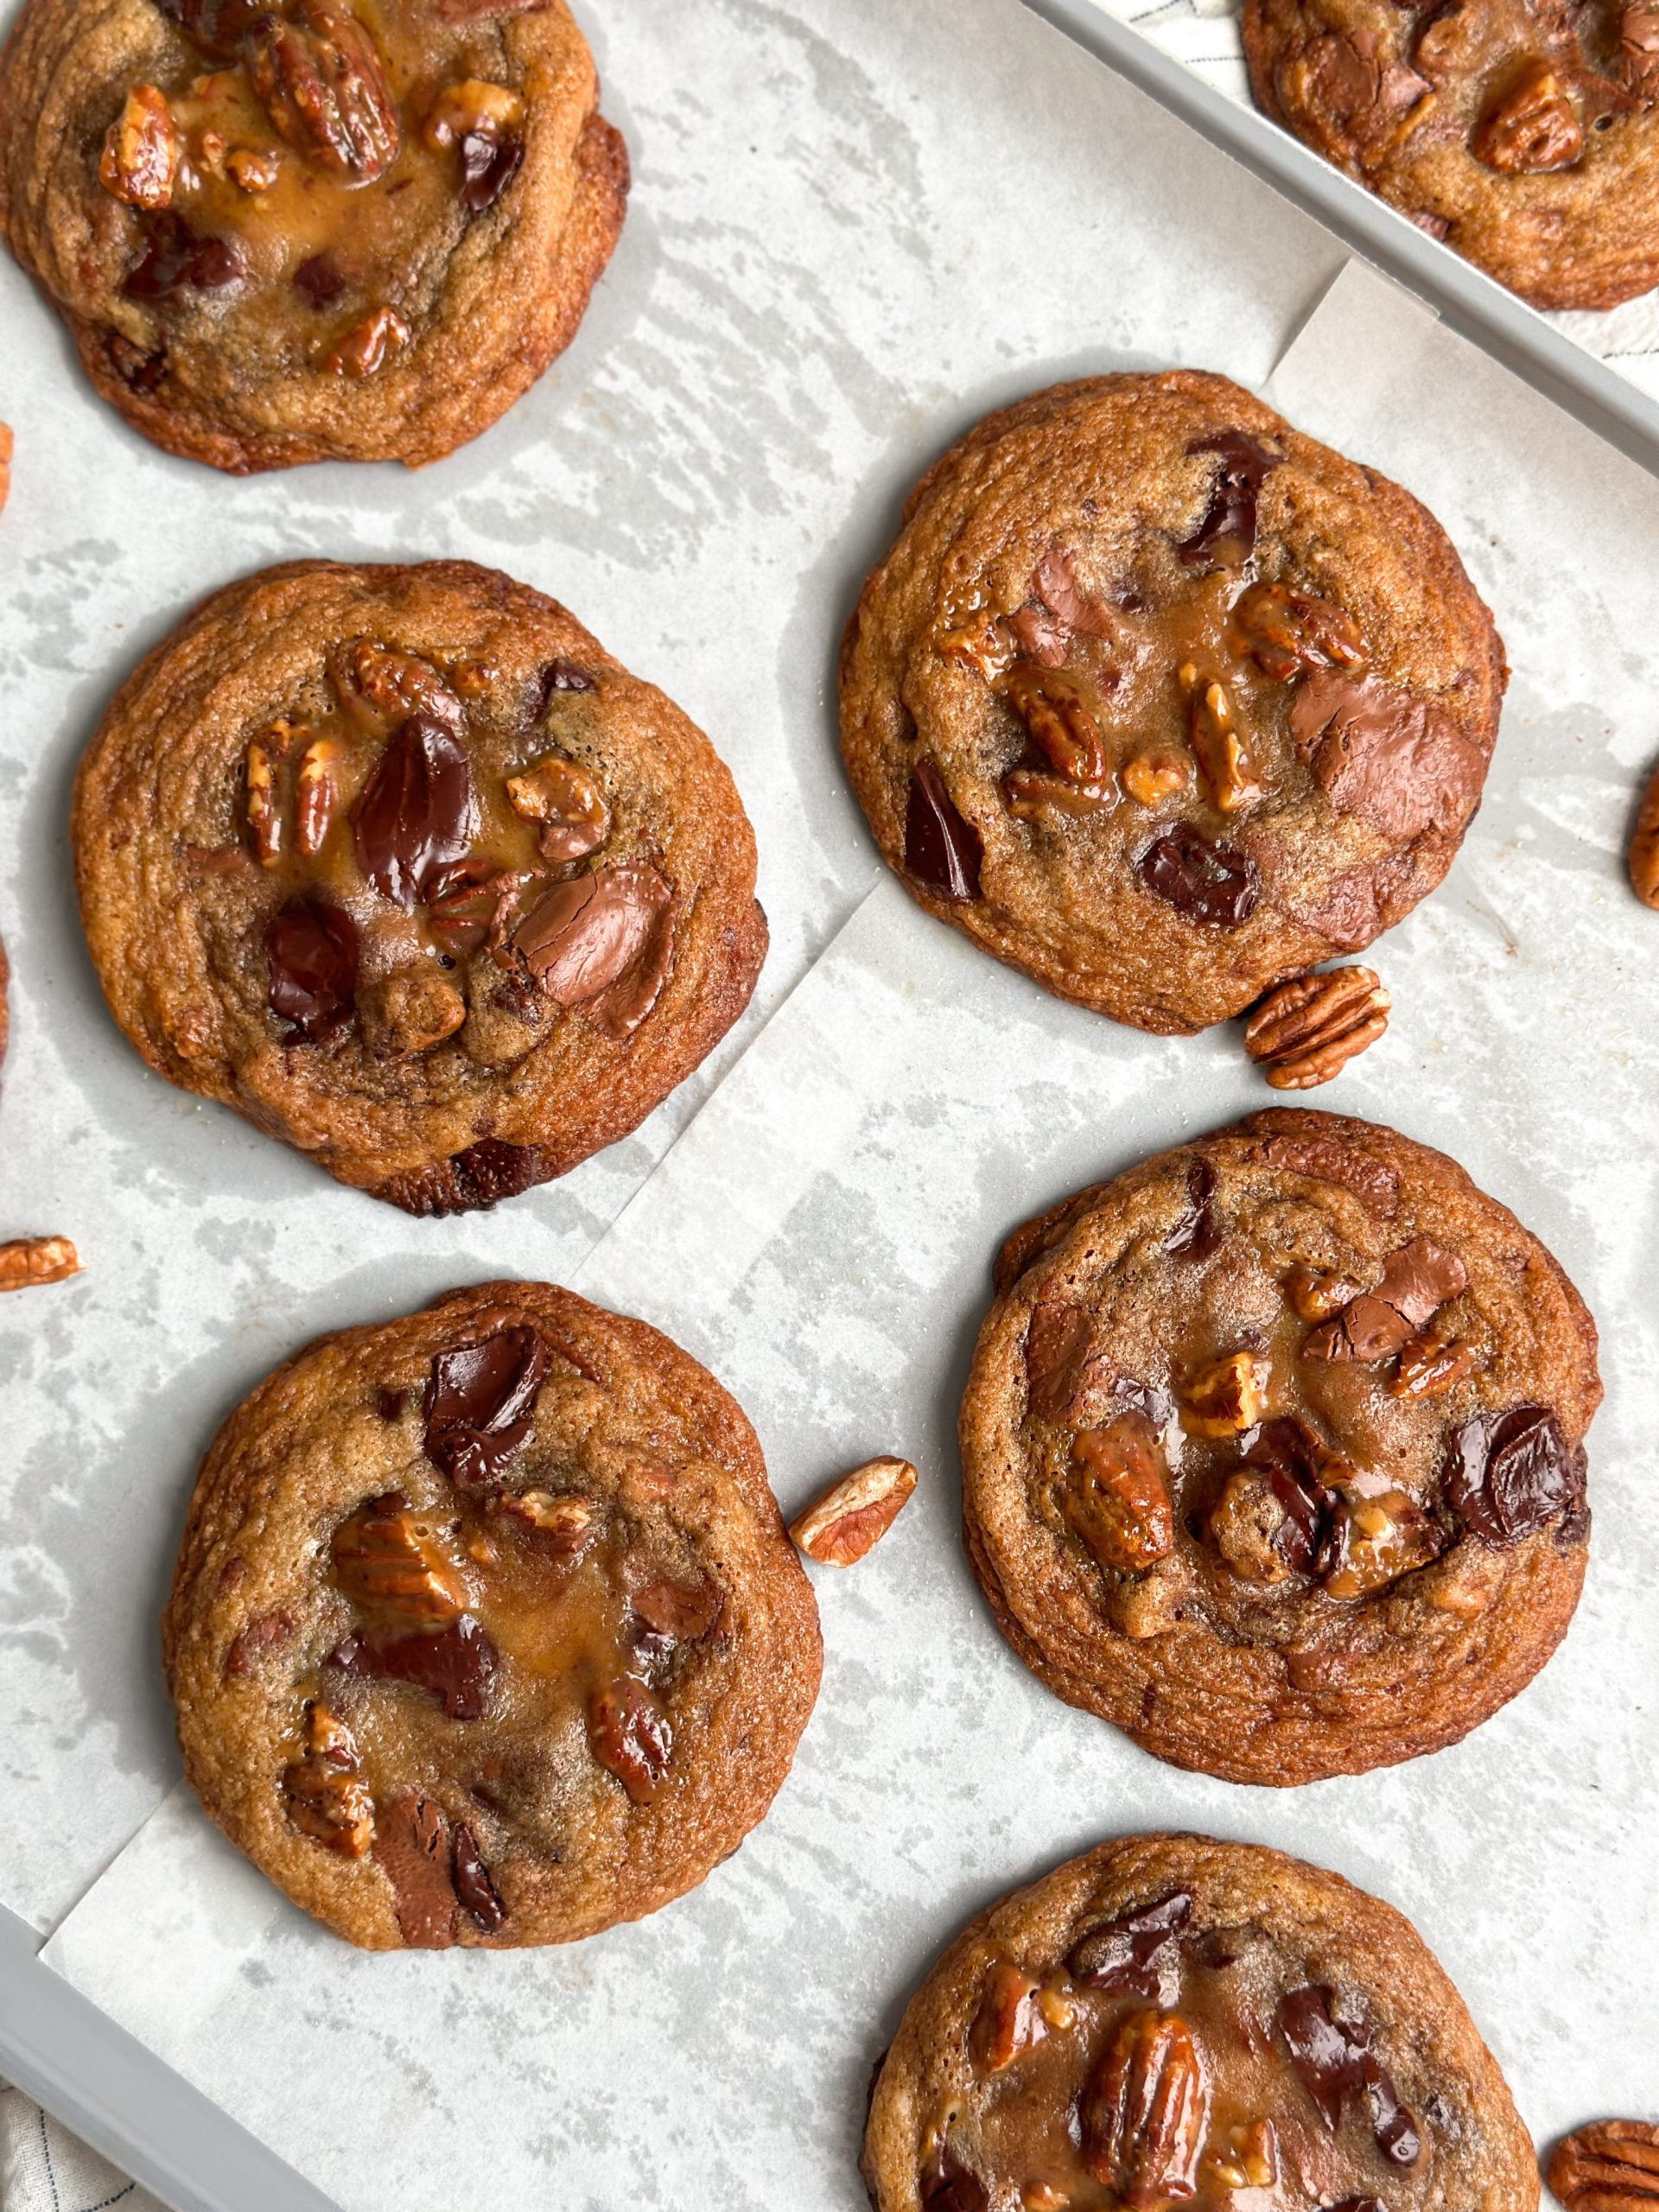 6 salted caramel pecan chocolate chip cookies placed side by side with some pecans scattered. cookies are a deep golden color and look crispy and chewy with puddles of chocolate